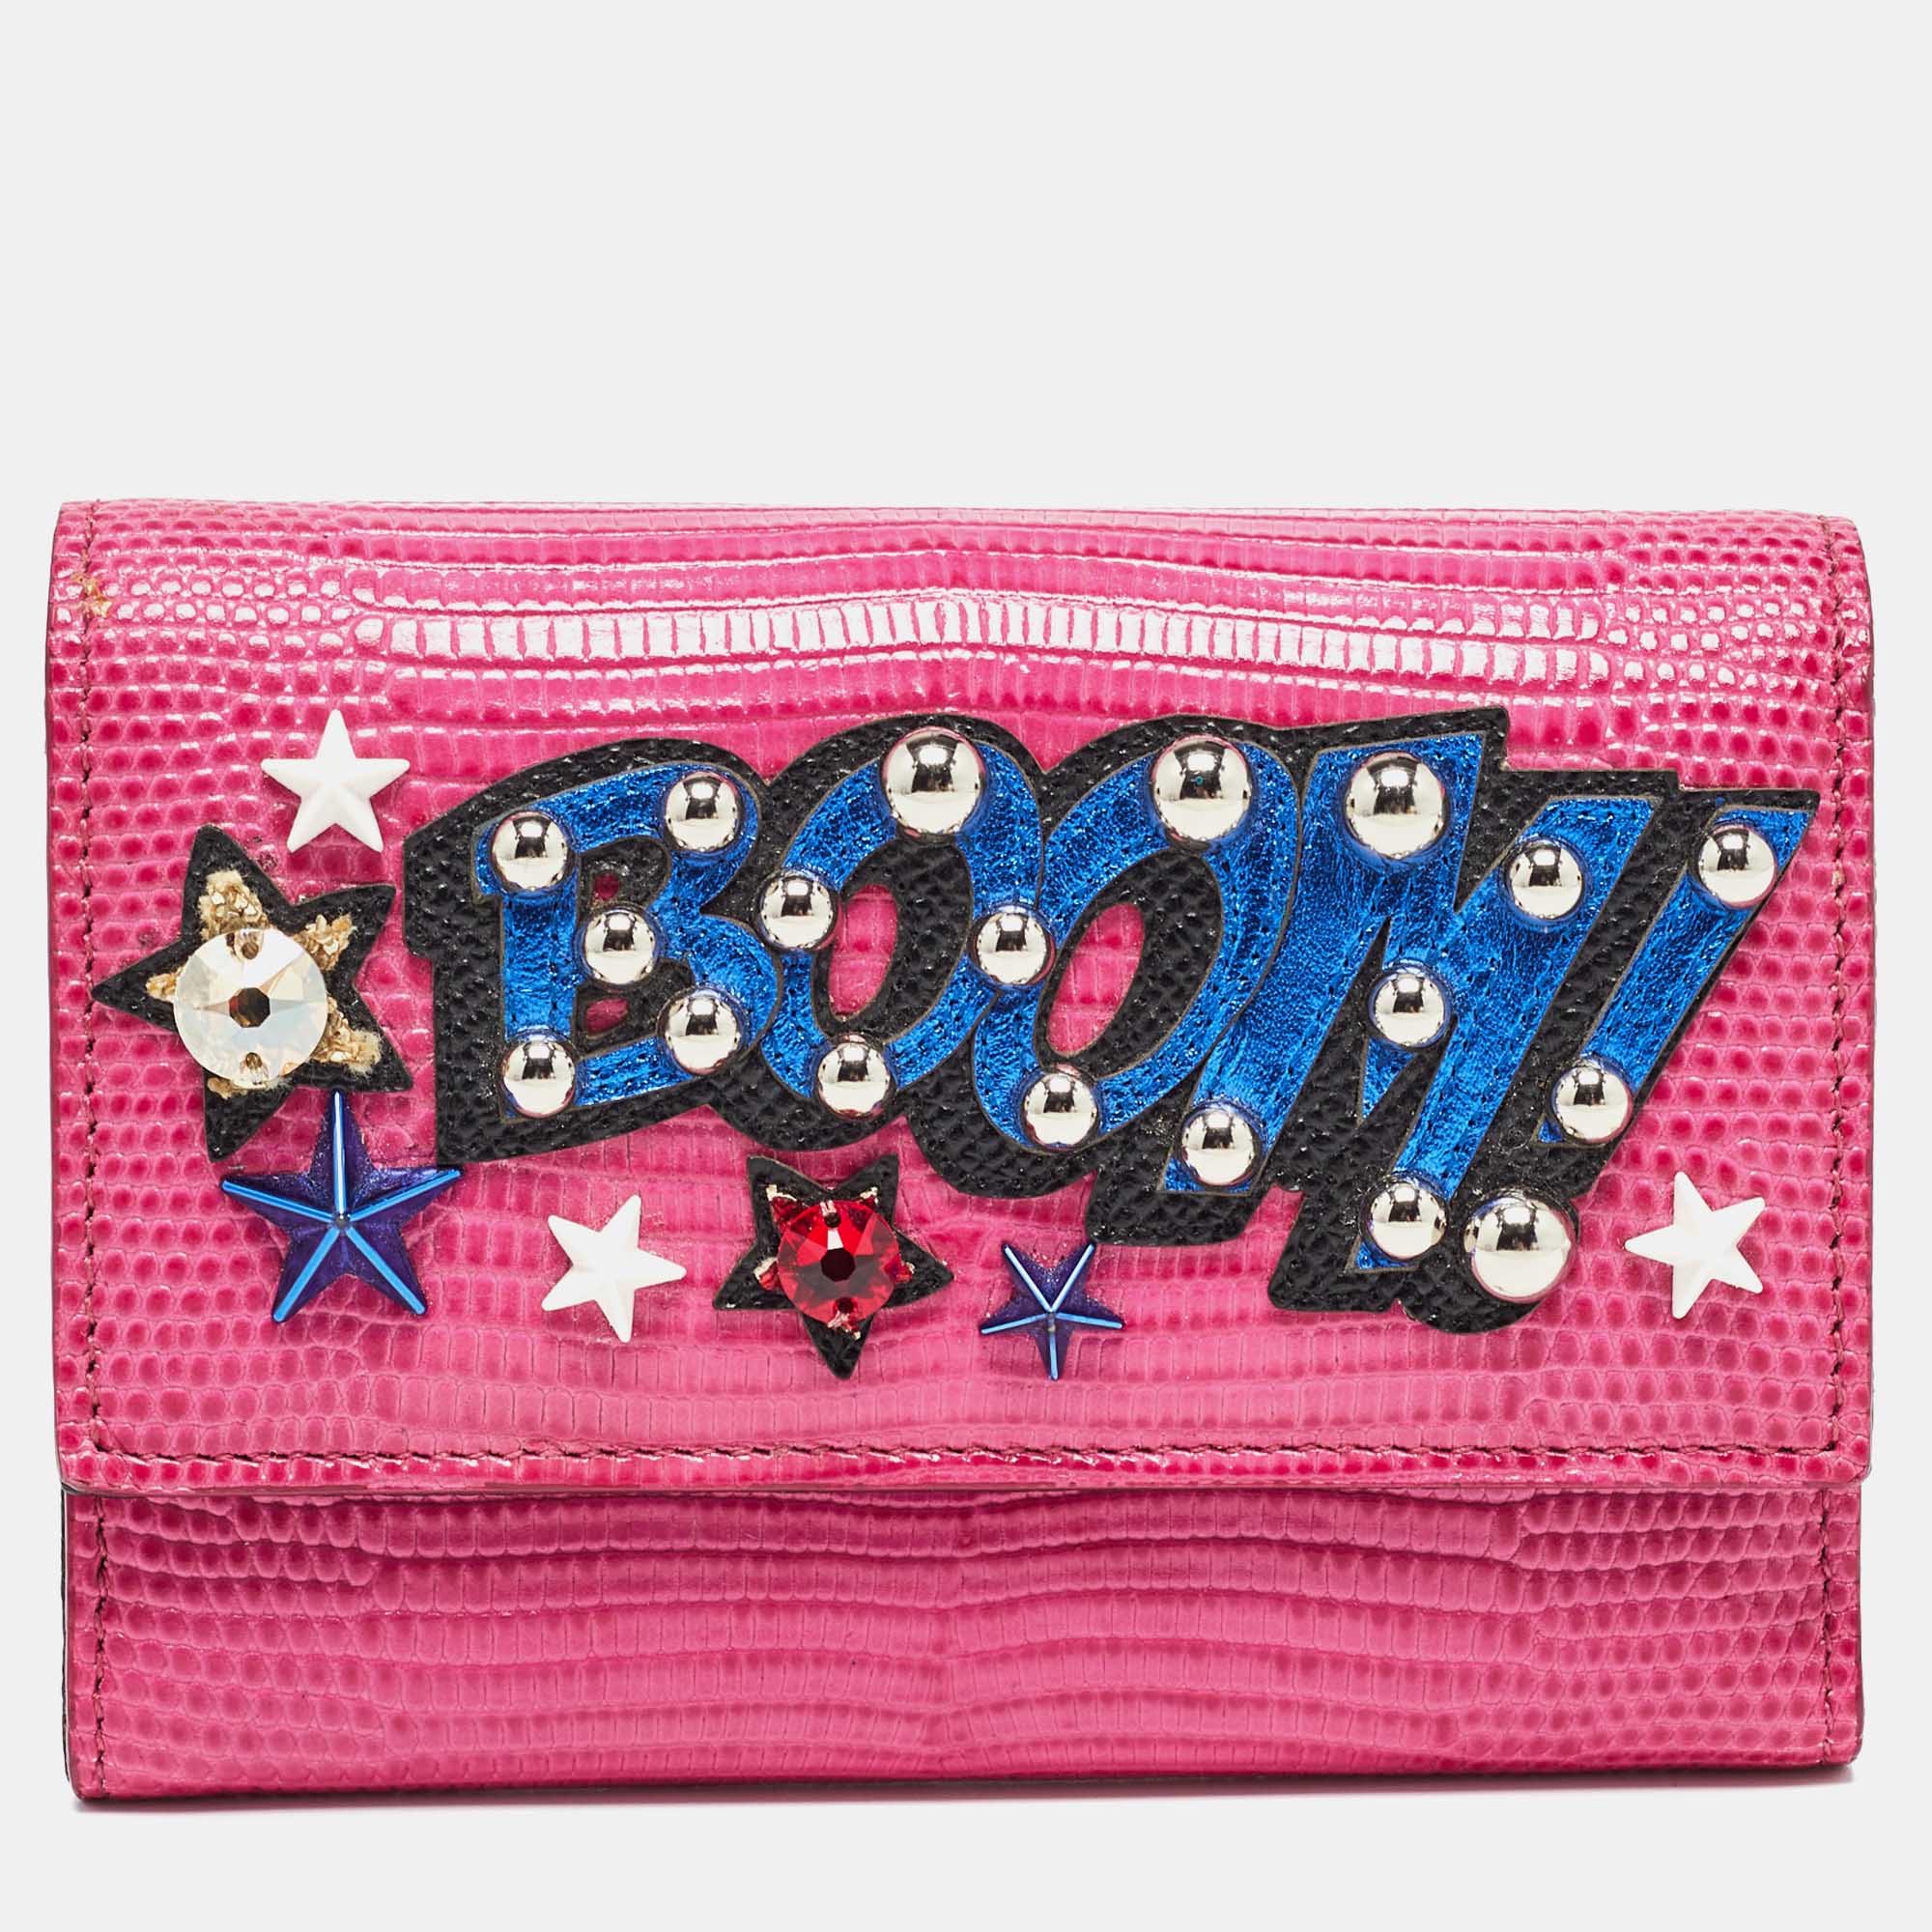 Dolce & gabbana pink lizard embossed leather boom patch trifold wallet